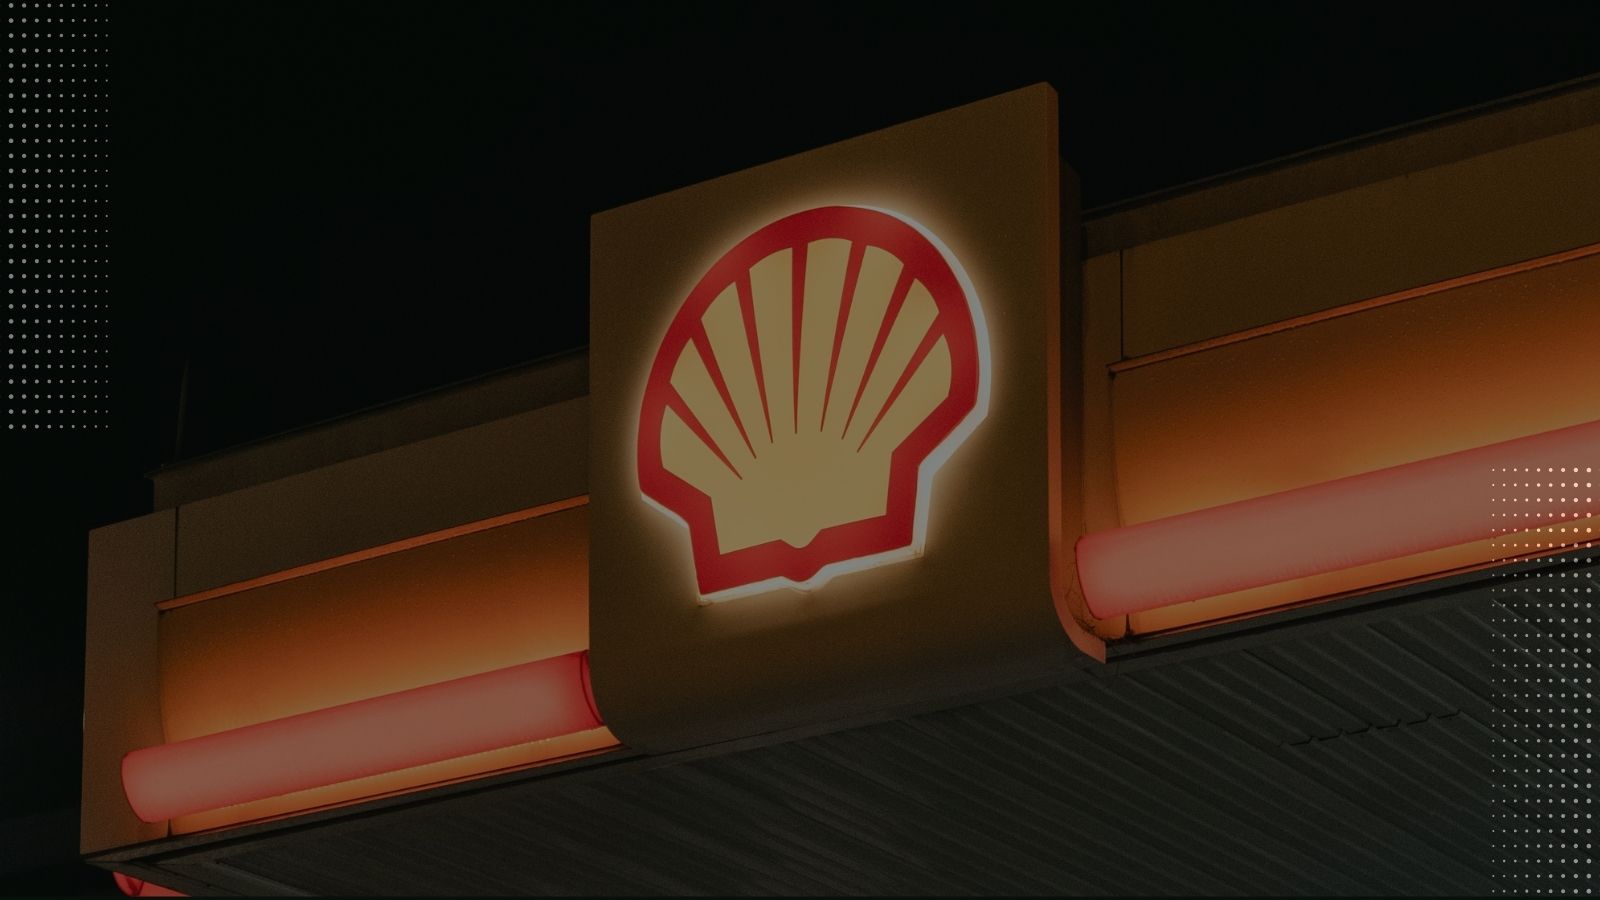 Shell Employees Express Concerns, Advocate for Renewable Energy Transition